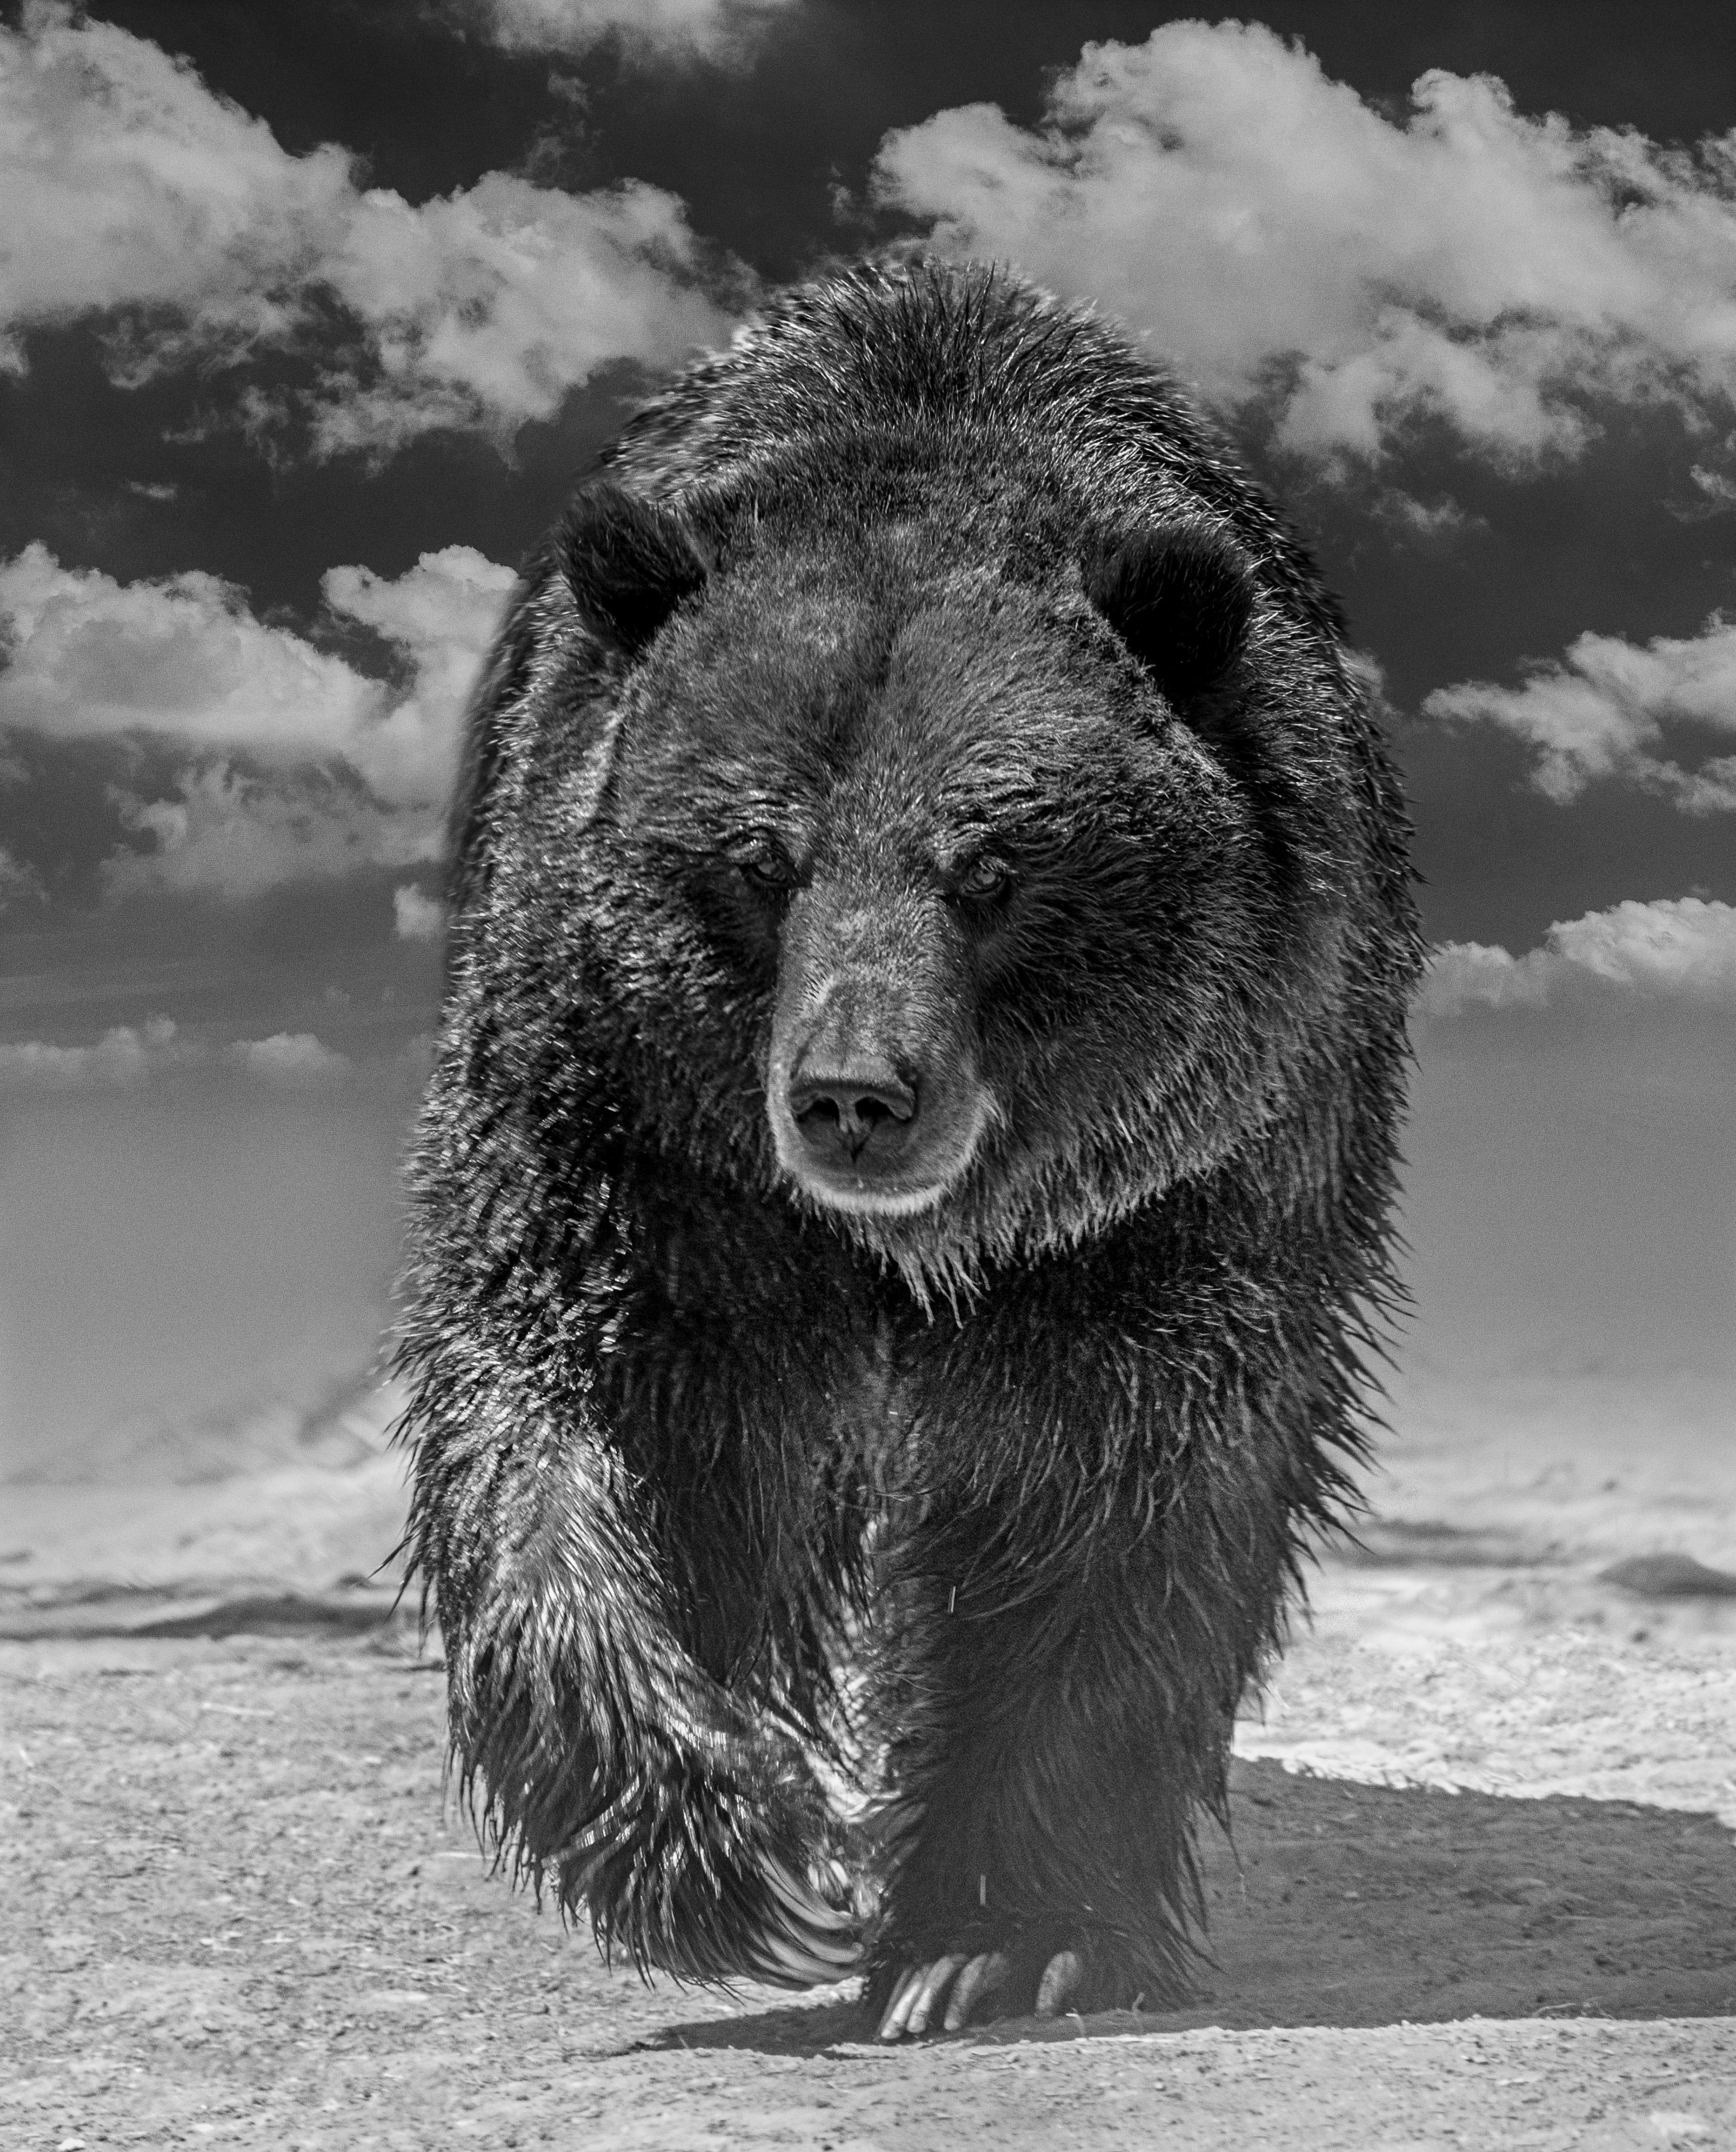 Contemporary black and white photograph of a grizzly bear. 
36x48  edition of 12. Signed by artist. 
Printed on archival paper using archival ink. 
Framing available. Inquire for rates. 


Shane Russeck has built a reputation for capturing America's